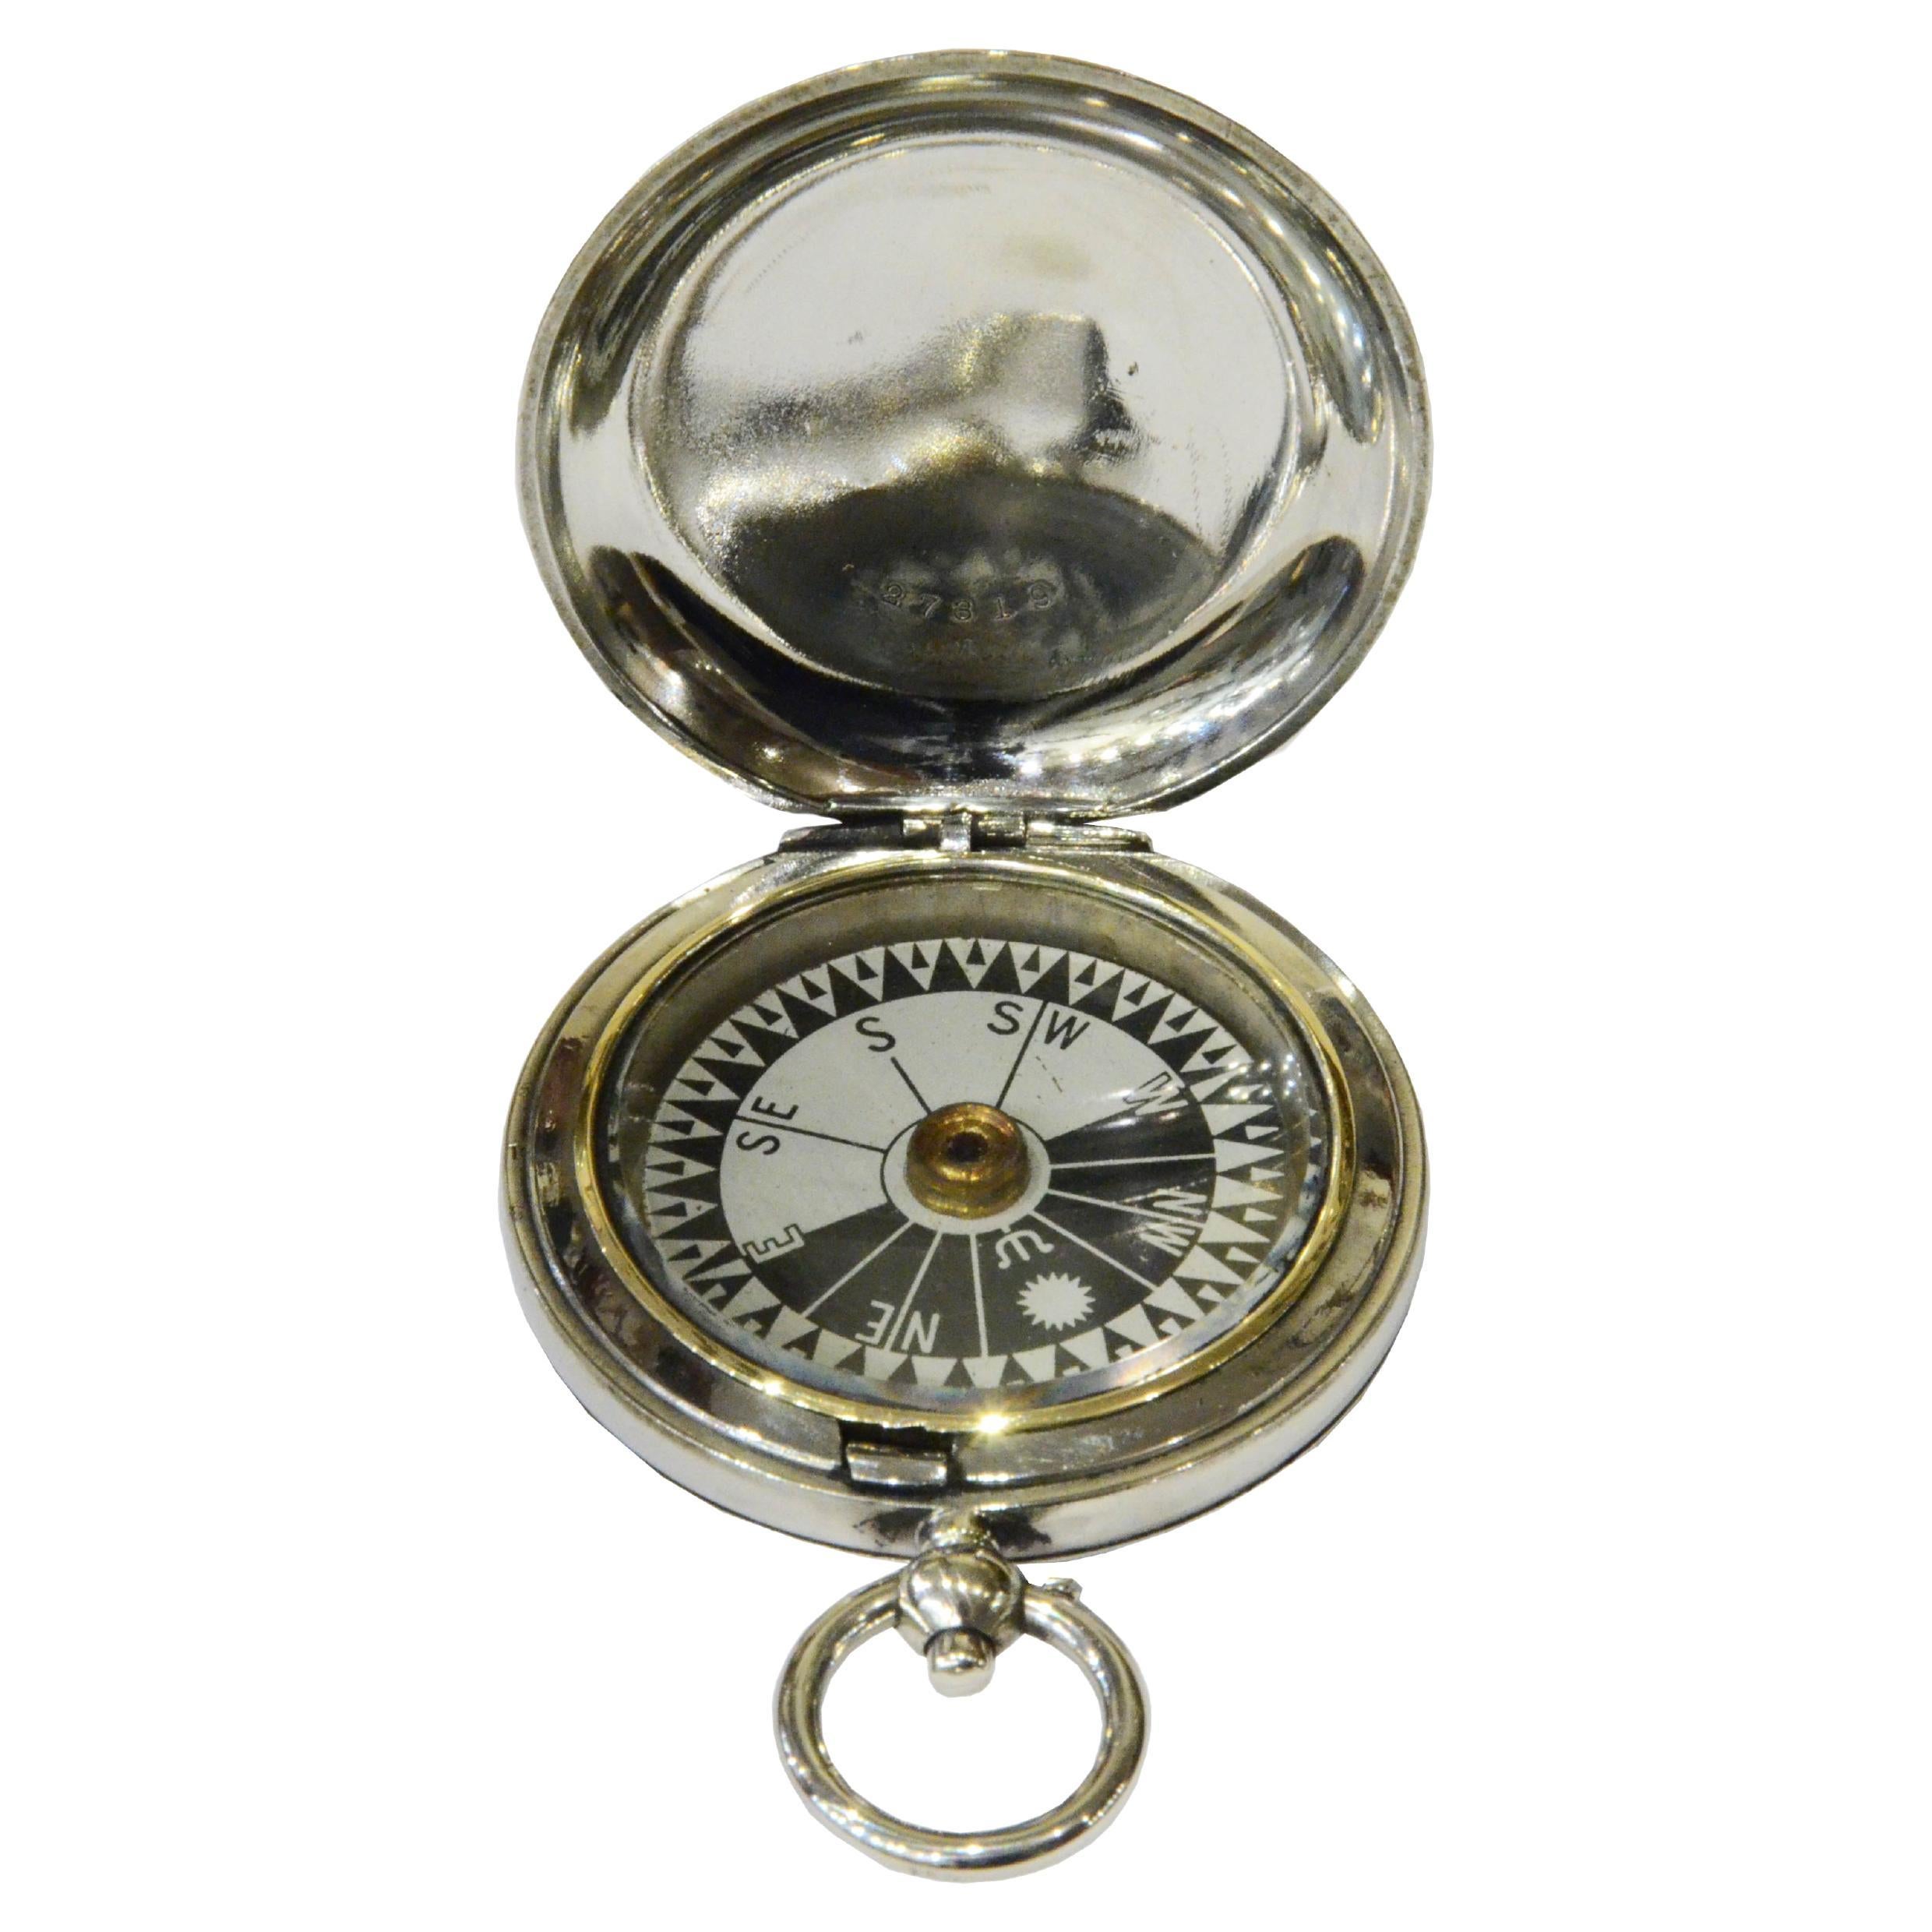 What is a pocket compass used for?